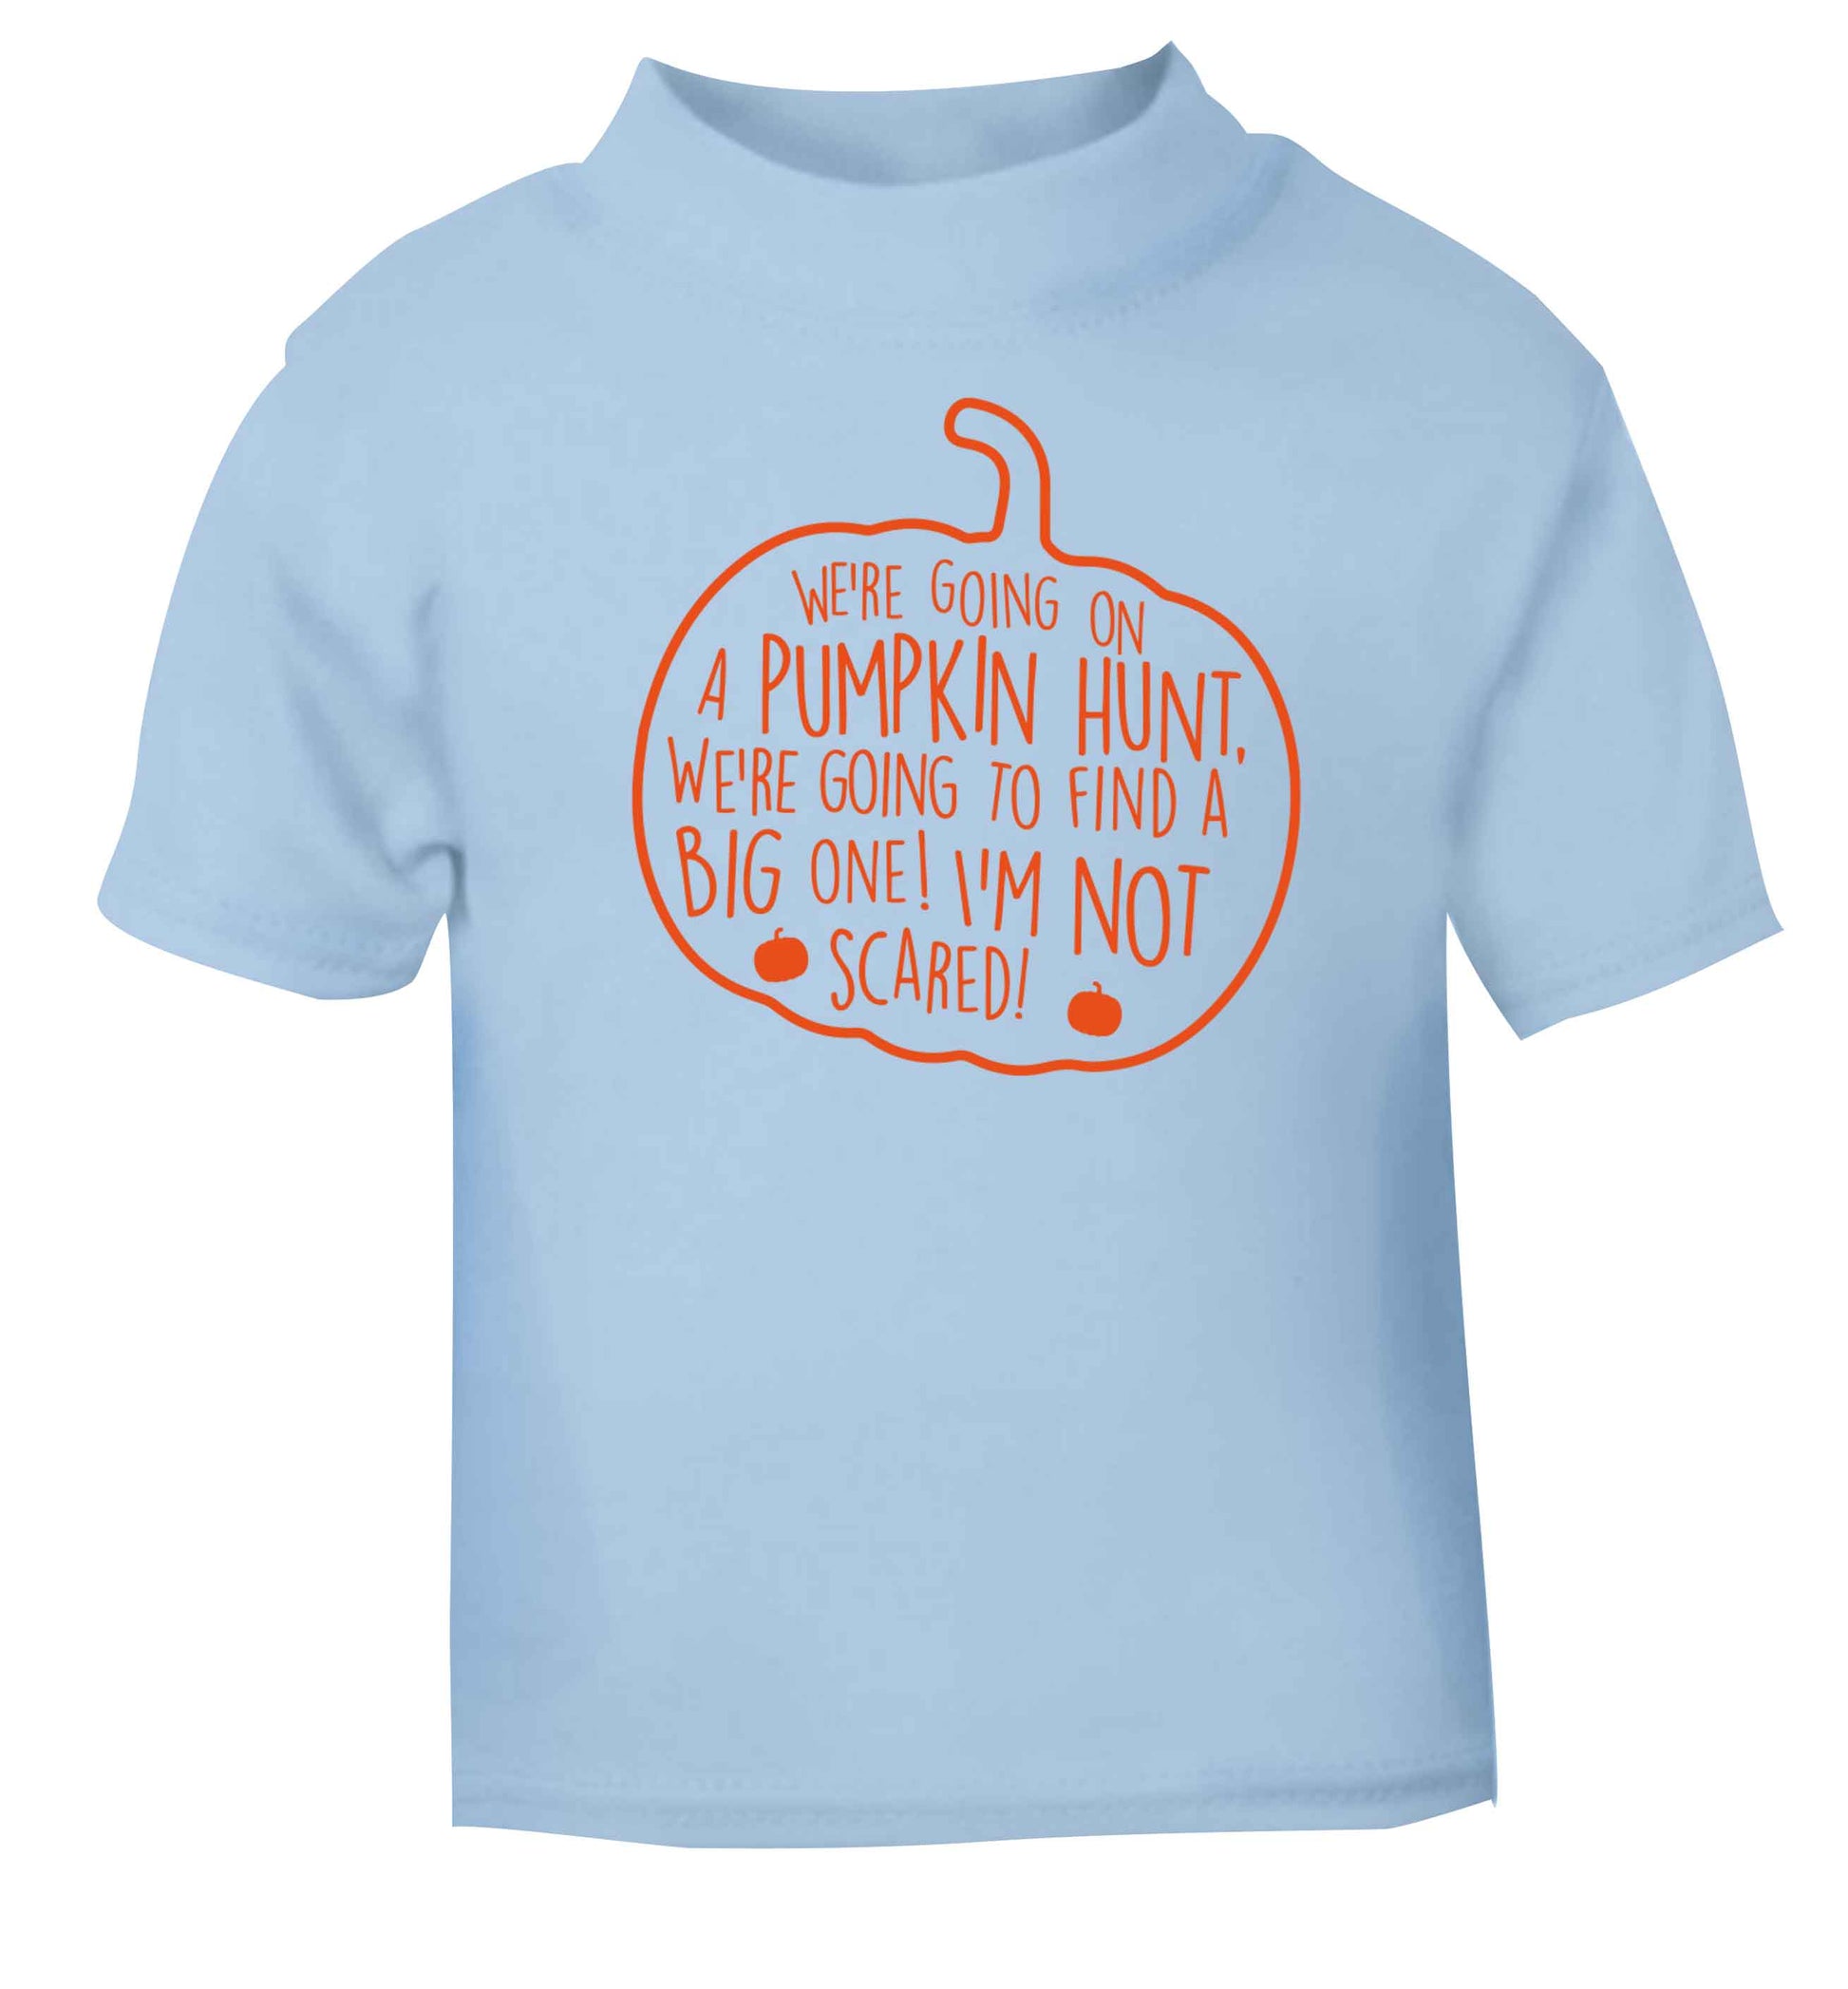 We're going on a pumpkin hunt light blue baby toddler Tshirt 2 Years